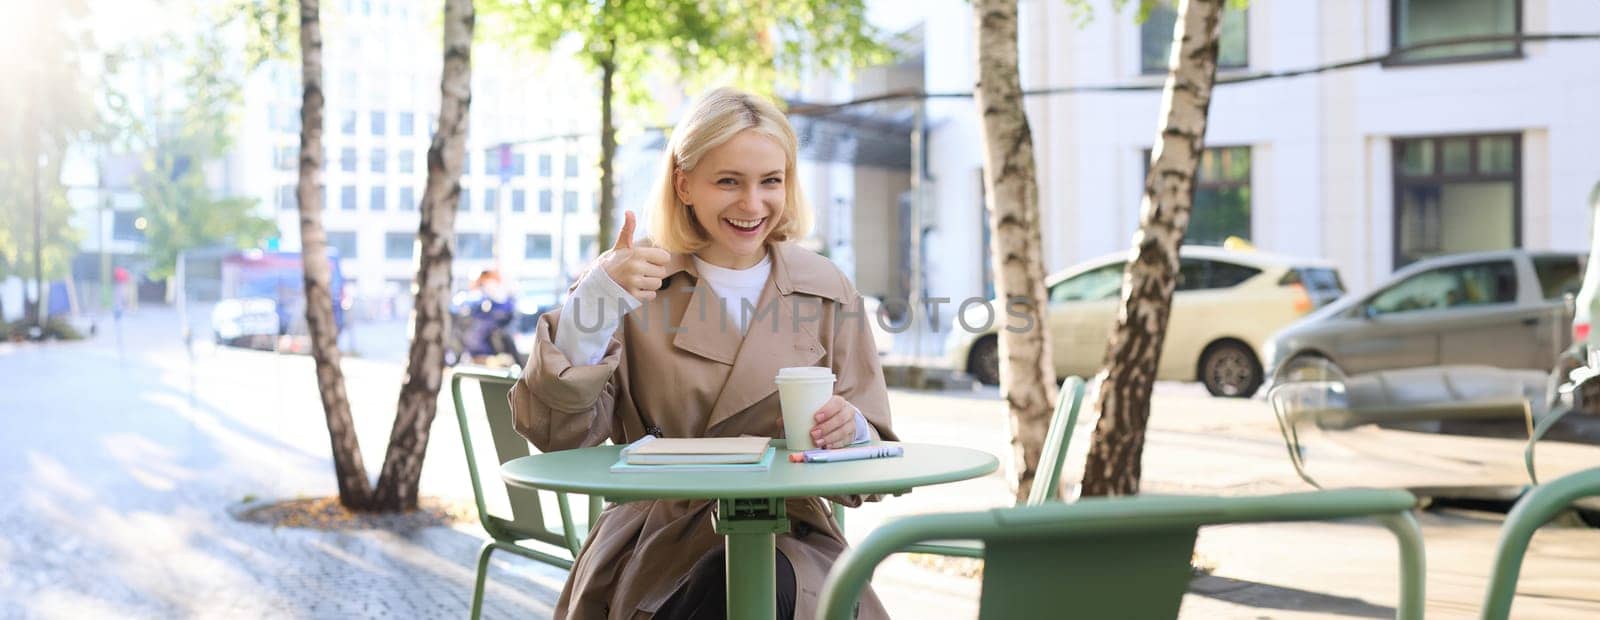 Smiling happy woman, sitting in cafe and showing thumbs up, recommending coffee place, gives her positive feedback.